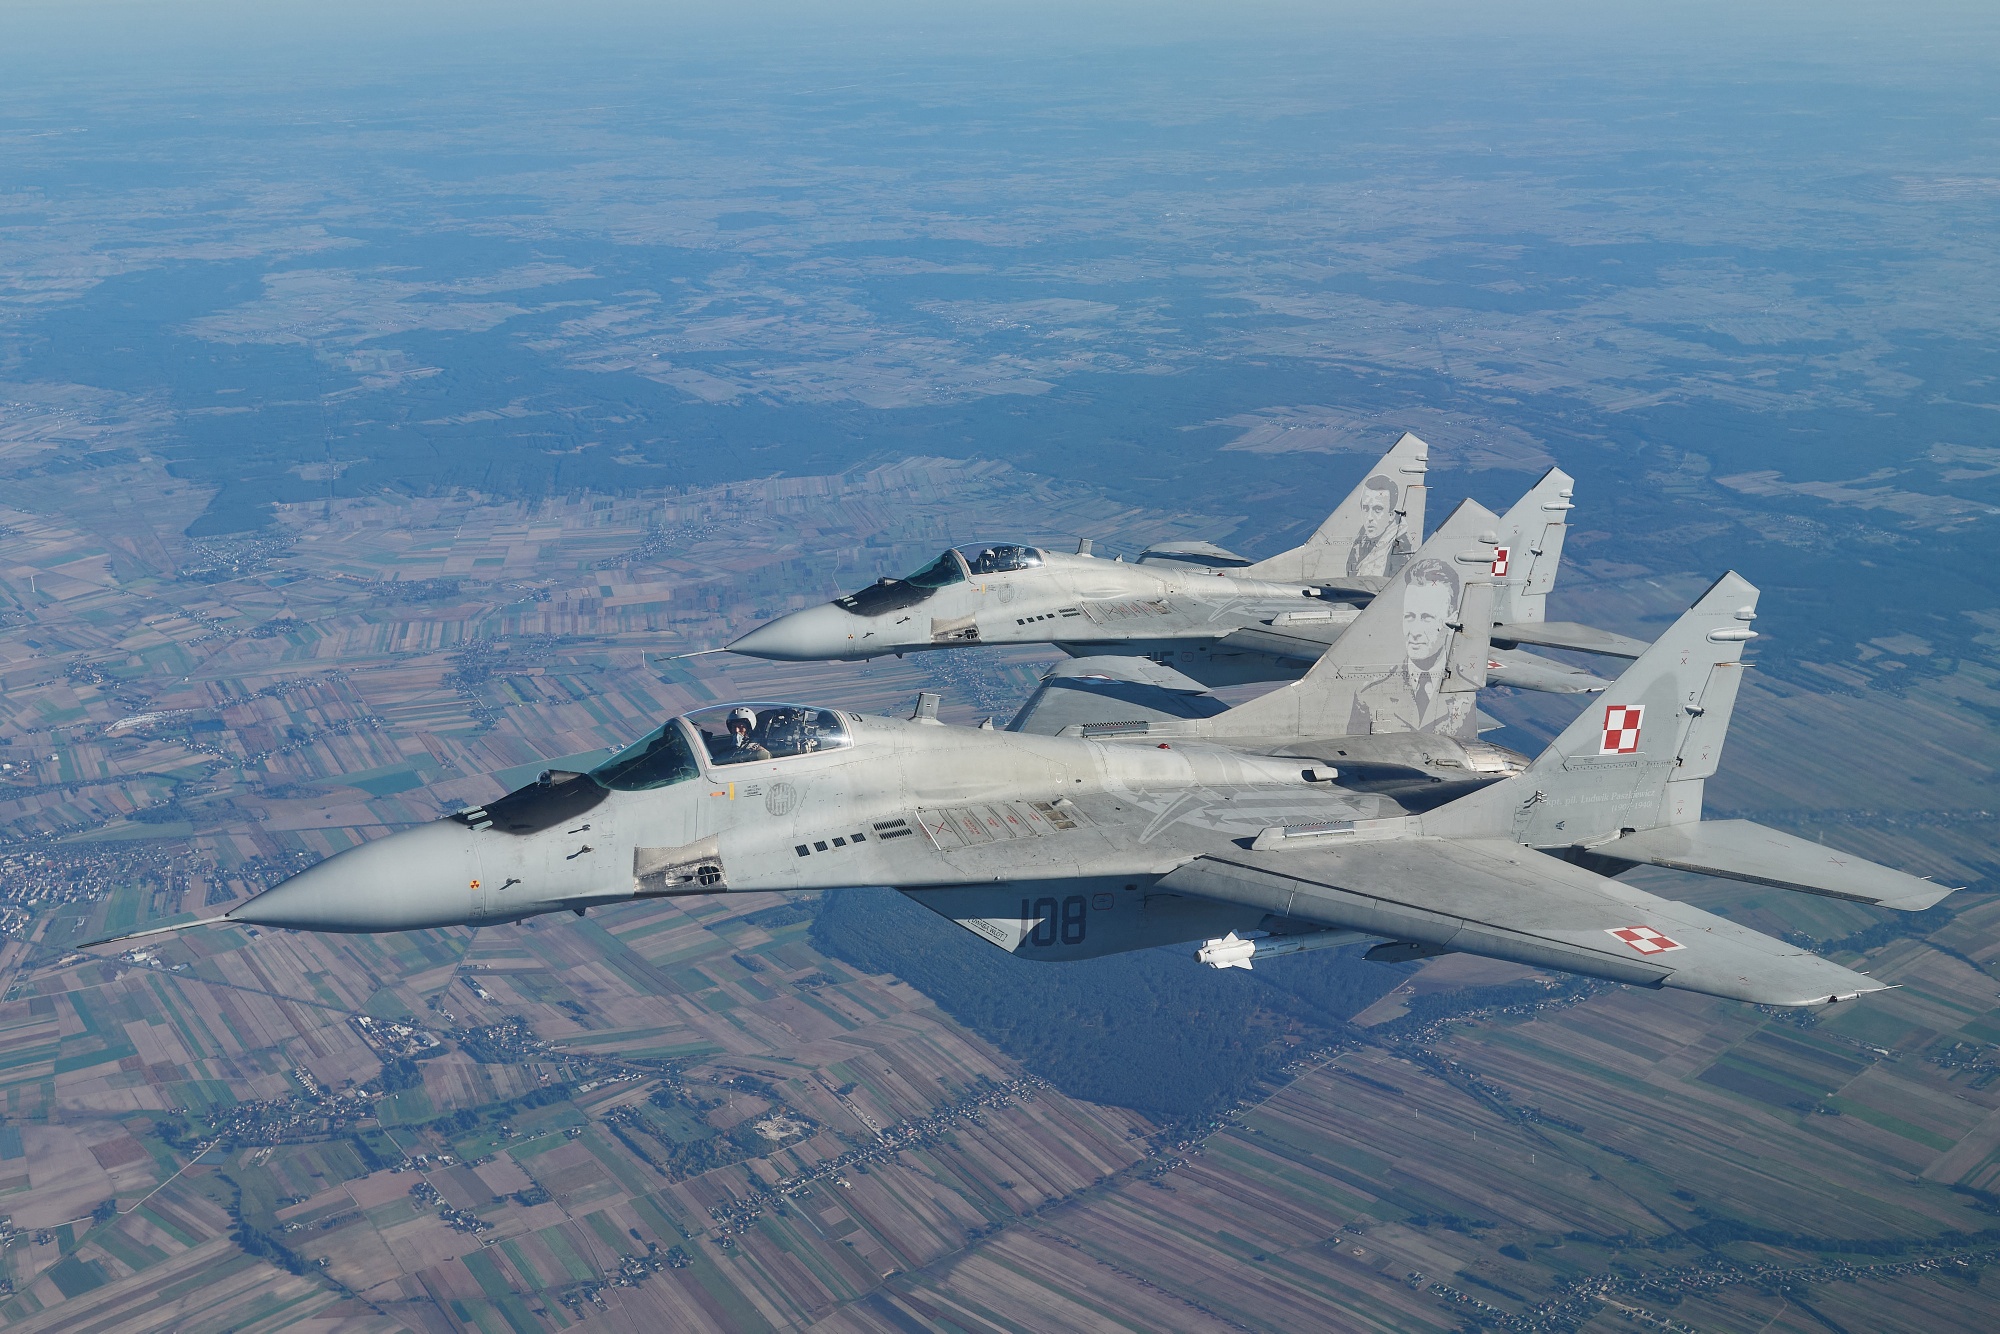 Poland and its allies deployed fighter jets in response to Russian missile strikes on Ukraine